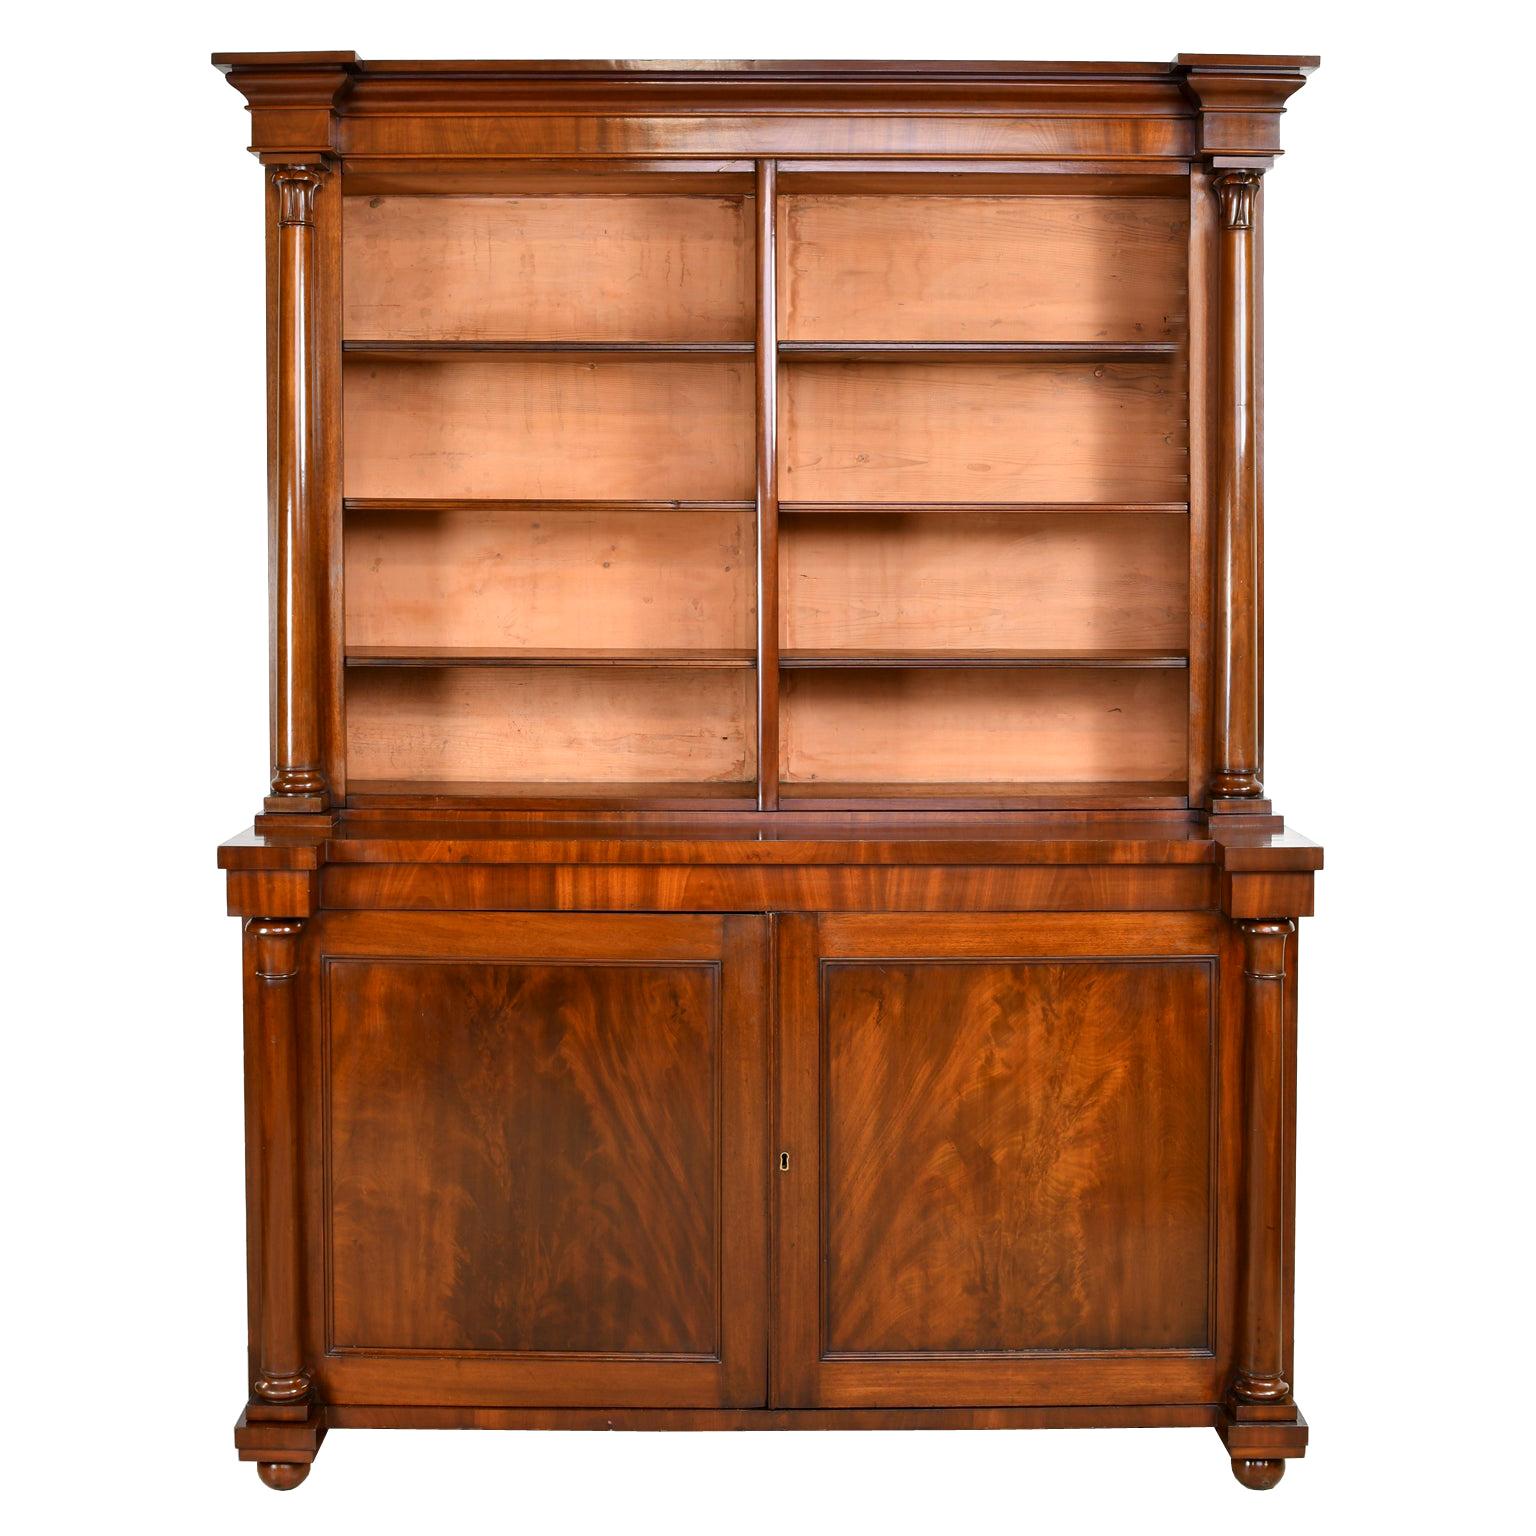 Polished Pair of Large William IV Bookcases in West Indies Mahogany, England, circa 1830